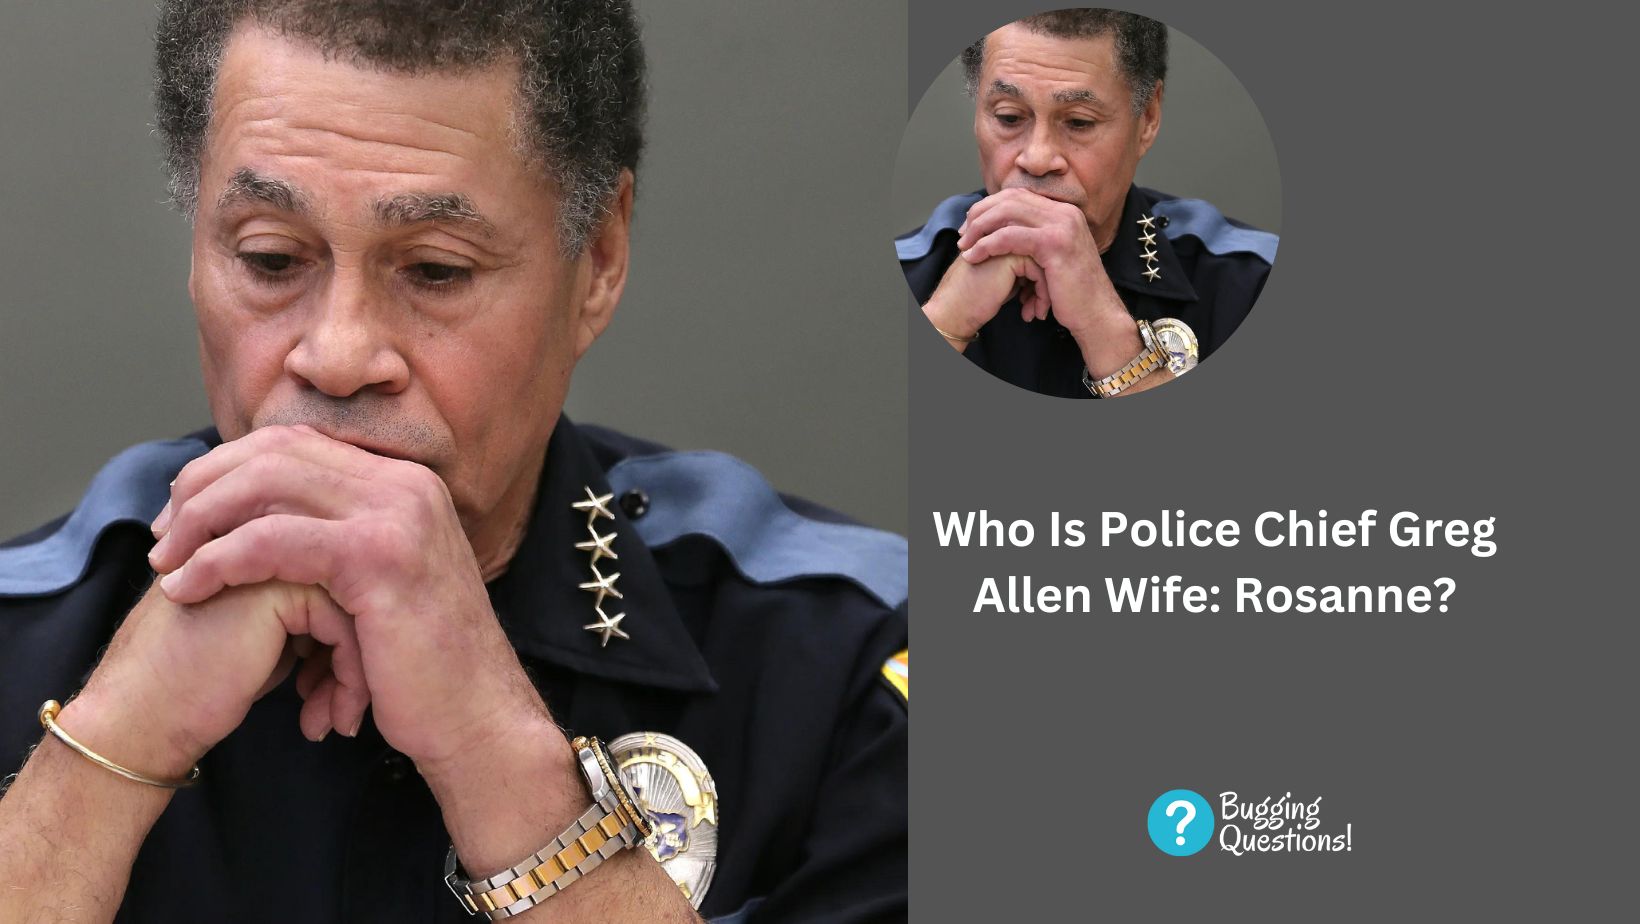 Who Is Police Chief Greg Allen Wife: Rosanne?